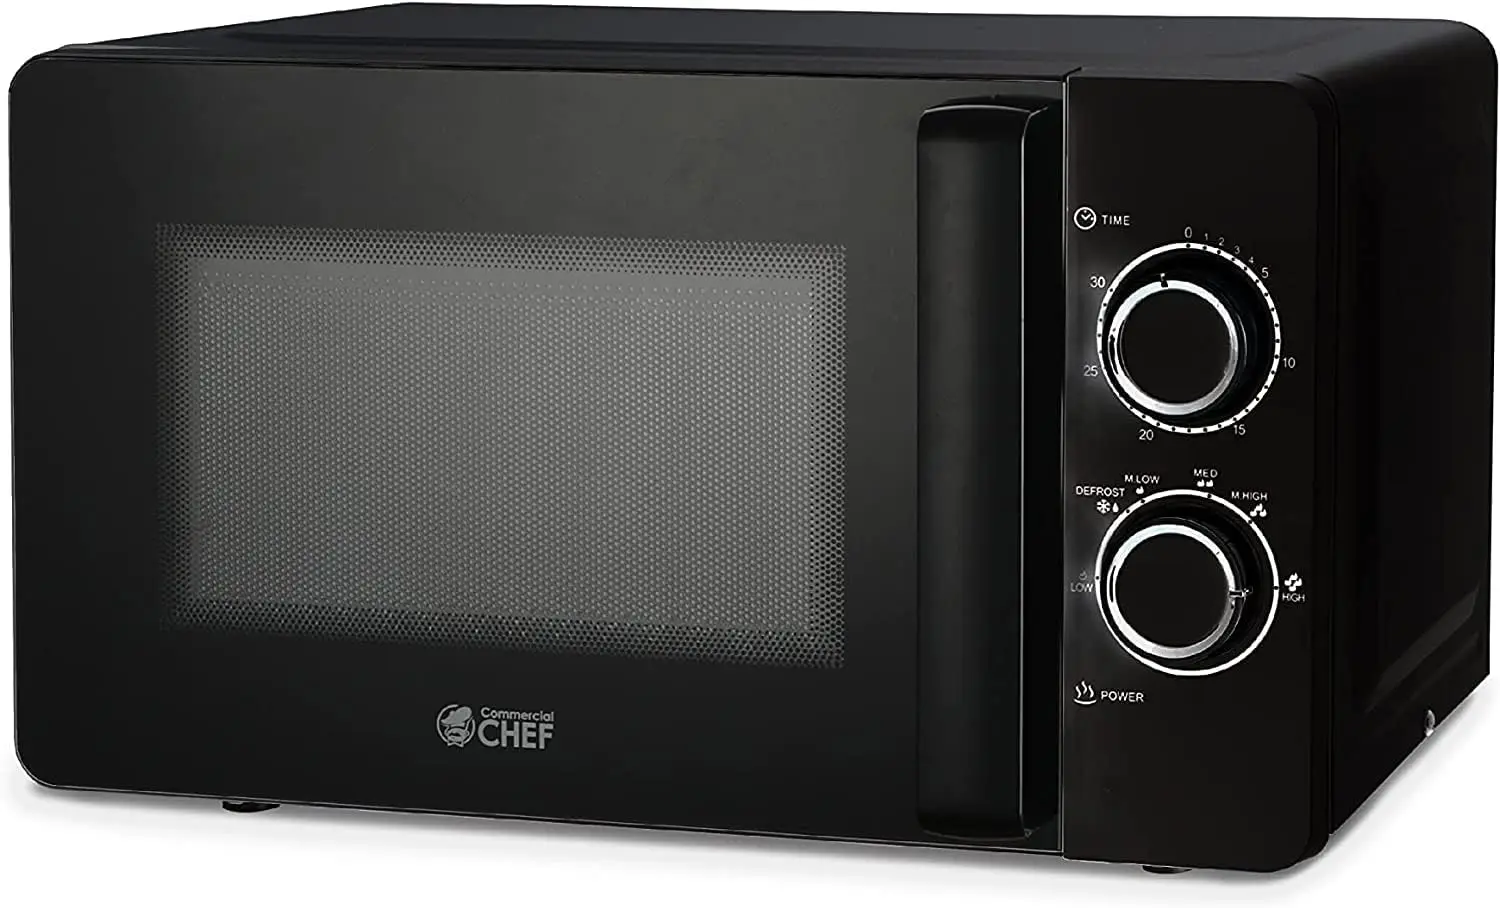 https://ae01.alicdn.com/kf/S02024dca3a54419d9a7c6e734d273361Z/CHEF-Small-Microwave-0-7-Cu-Ft-Countertop-Microwave-with-Mechanical-Control-Black-Microwave-with-6.jpg